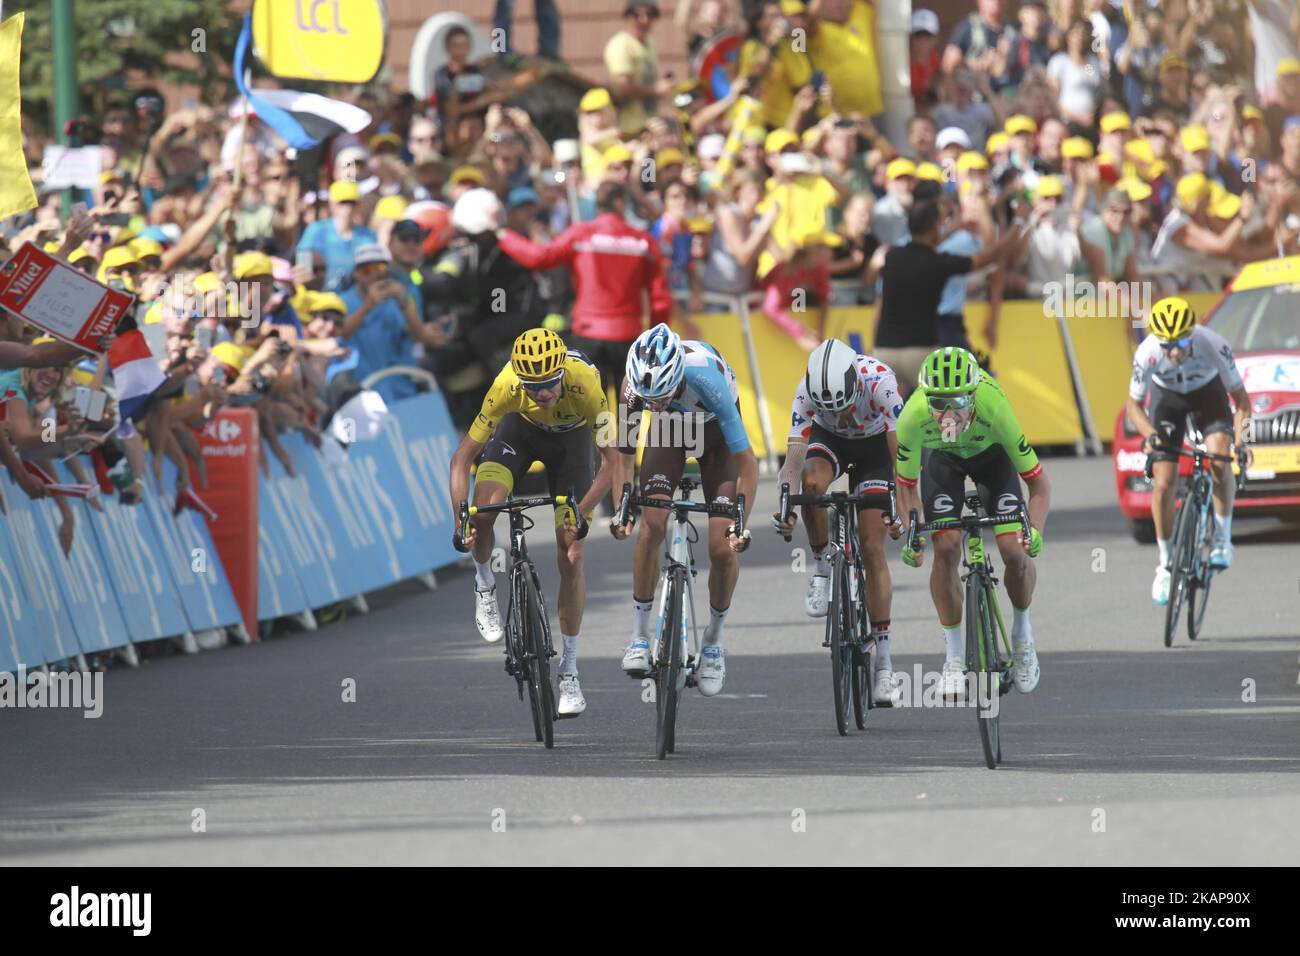 (From L) Great Britain's Christopher Froome wearing the overall leader's yellow jersey, France's Romain Bardet and Colombia's Rigoberto Uran ride towards the finish line during the 183 km seventeenth stage of the 104th edition of the Tour de France cycling race on July 19, 2017 between Le La Mure and Serre-Chevalier, French Alps. (Photo by Elyxandro Cegarra/NurPhoto) *** Please Use Credit from Credit Field *** Stock Photo